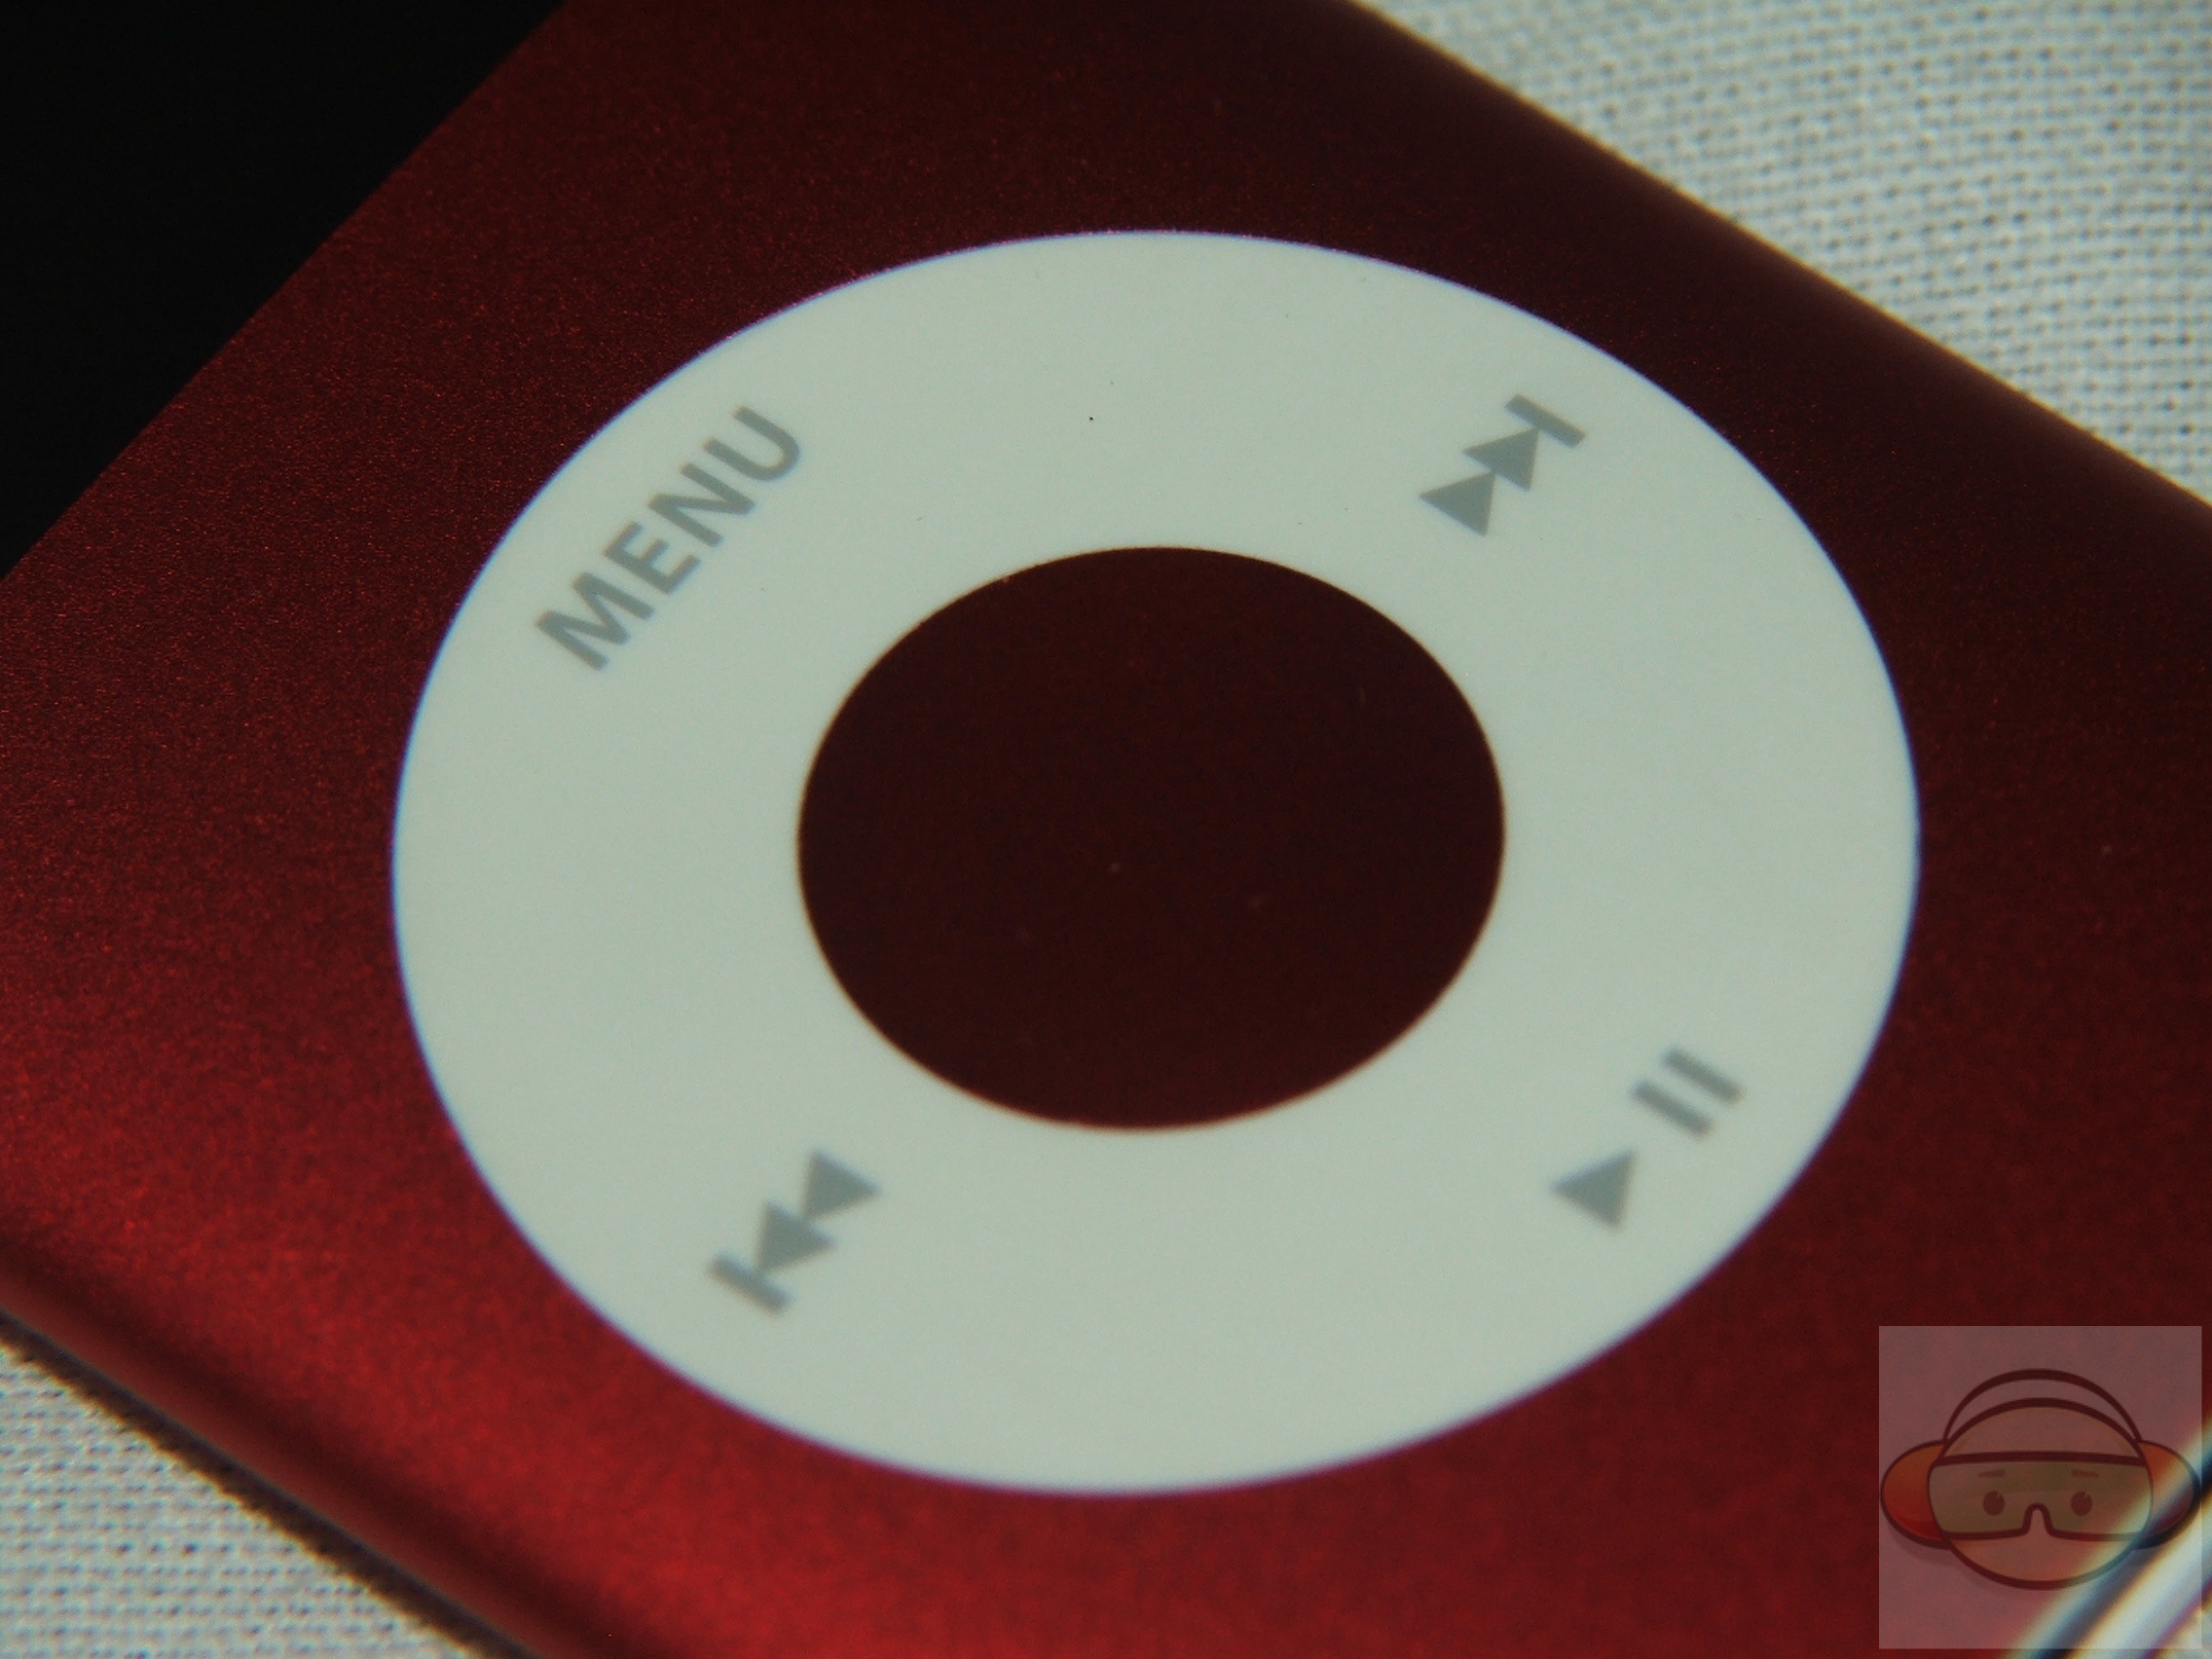 iPod Nano 4th Gen Product Red Color |